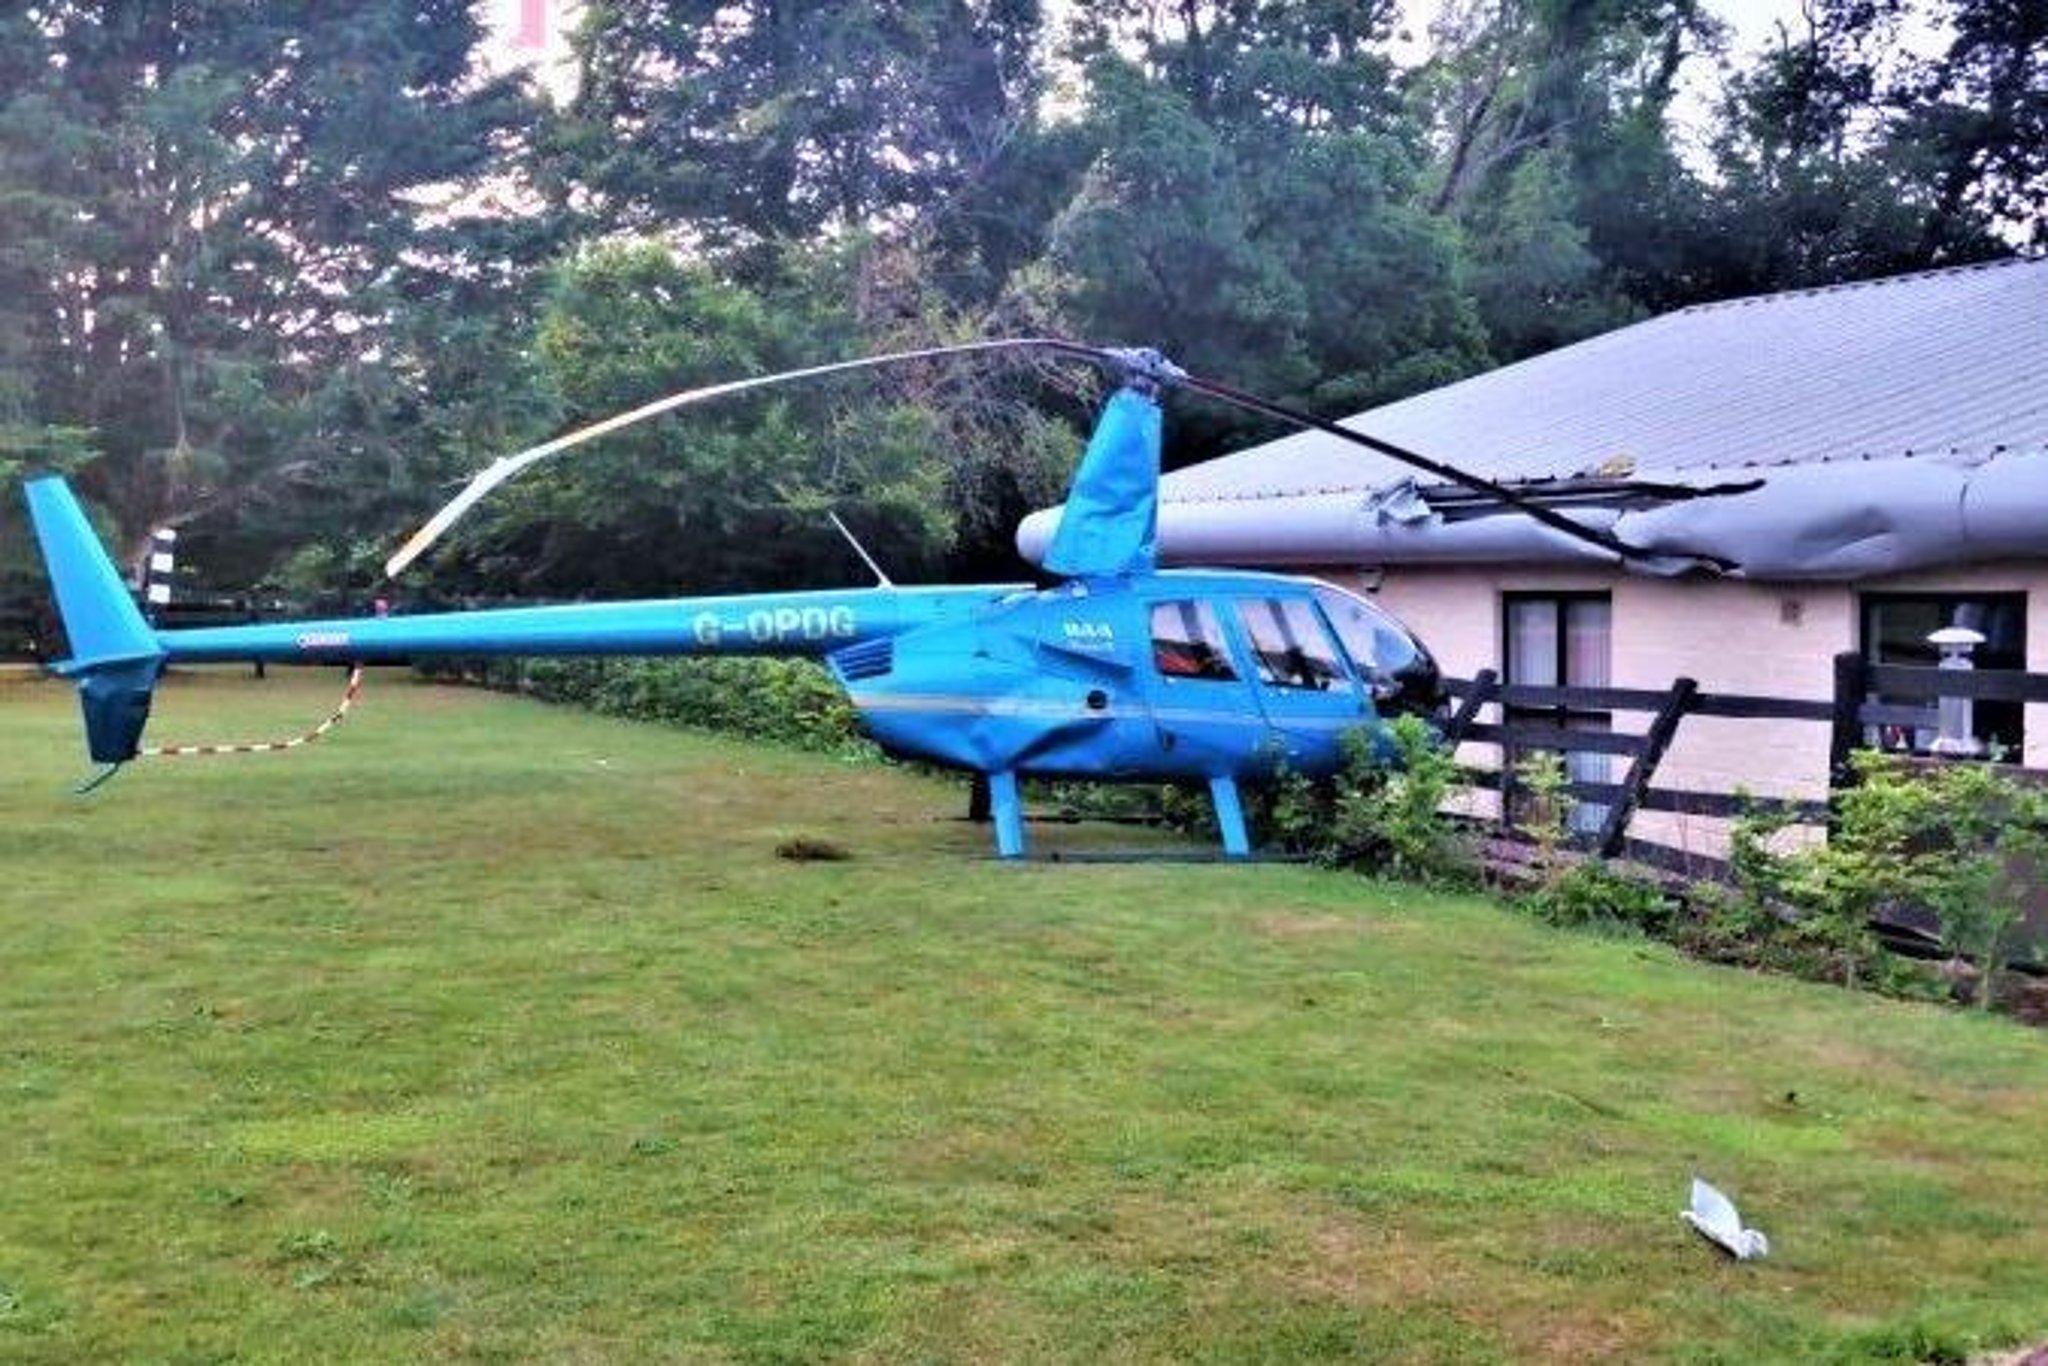 Helicopter blades took chunks out of a house during botched landing in Northern Ireland